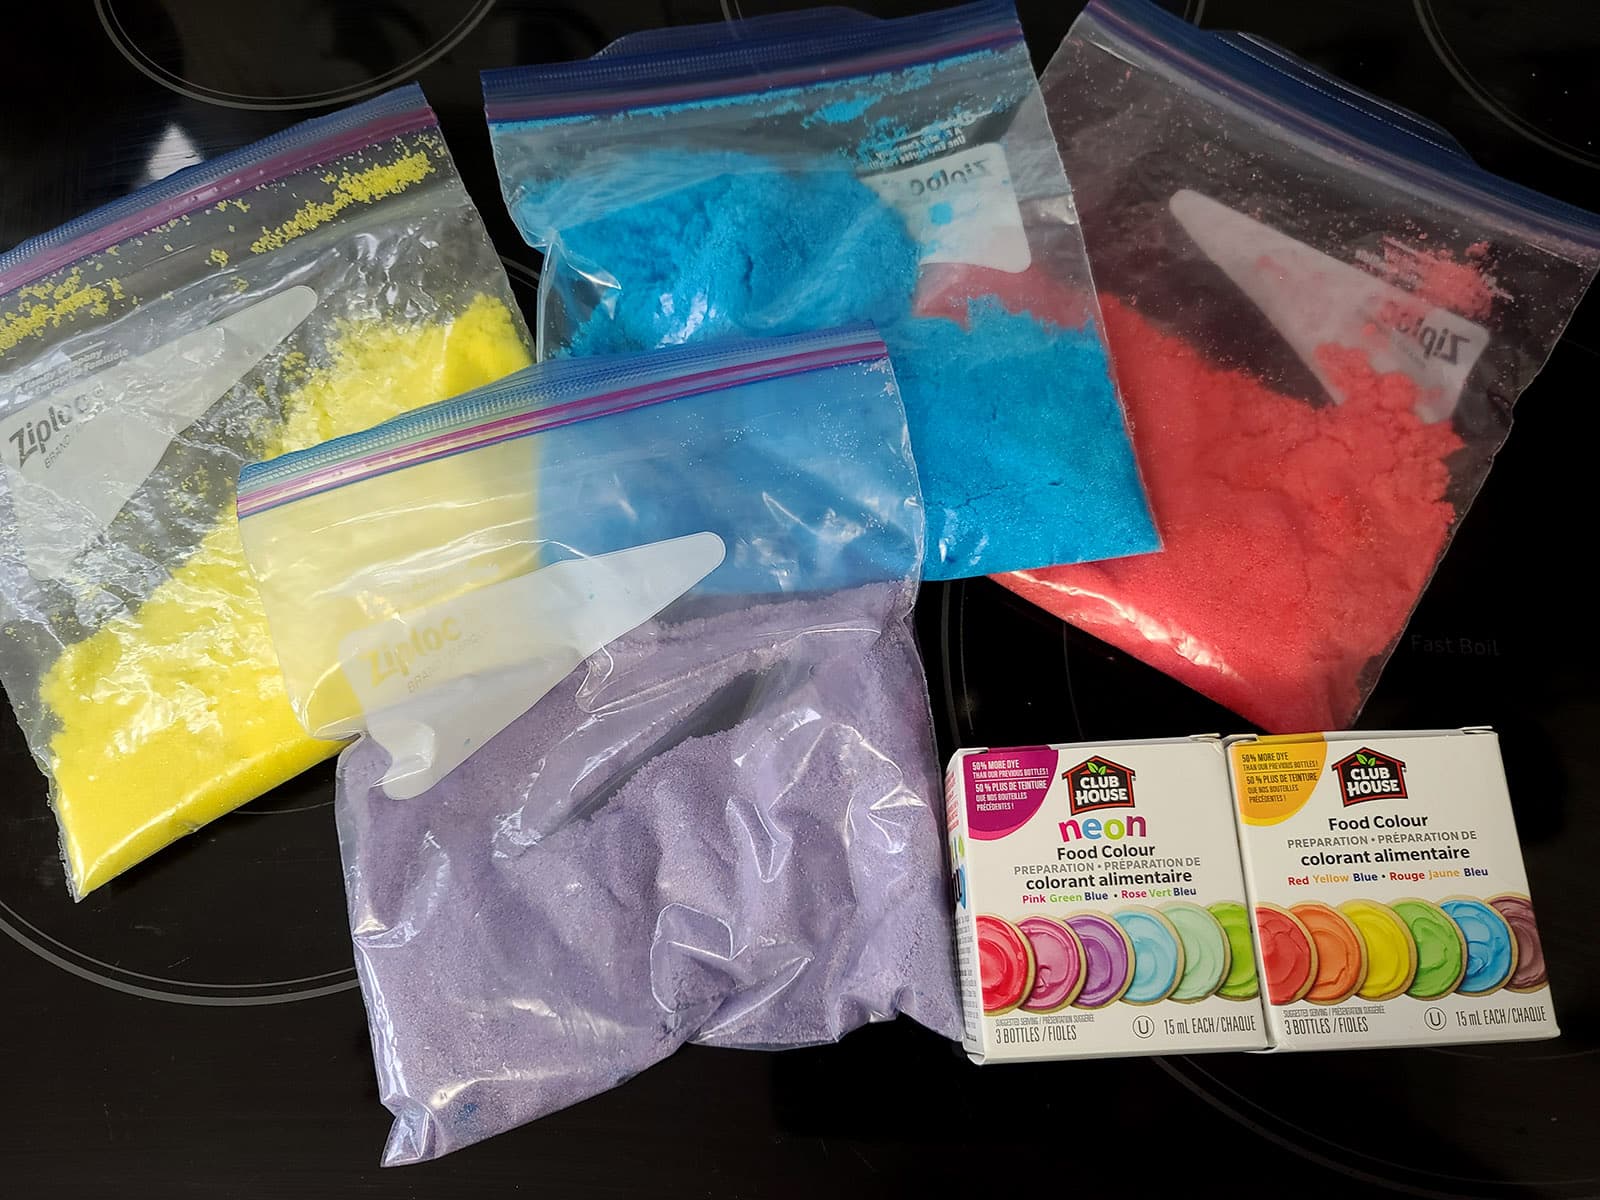 Bags of pink, purple, blue, and yellow colored sugar, along with a box of liquid food coloring.